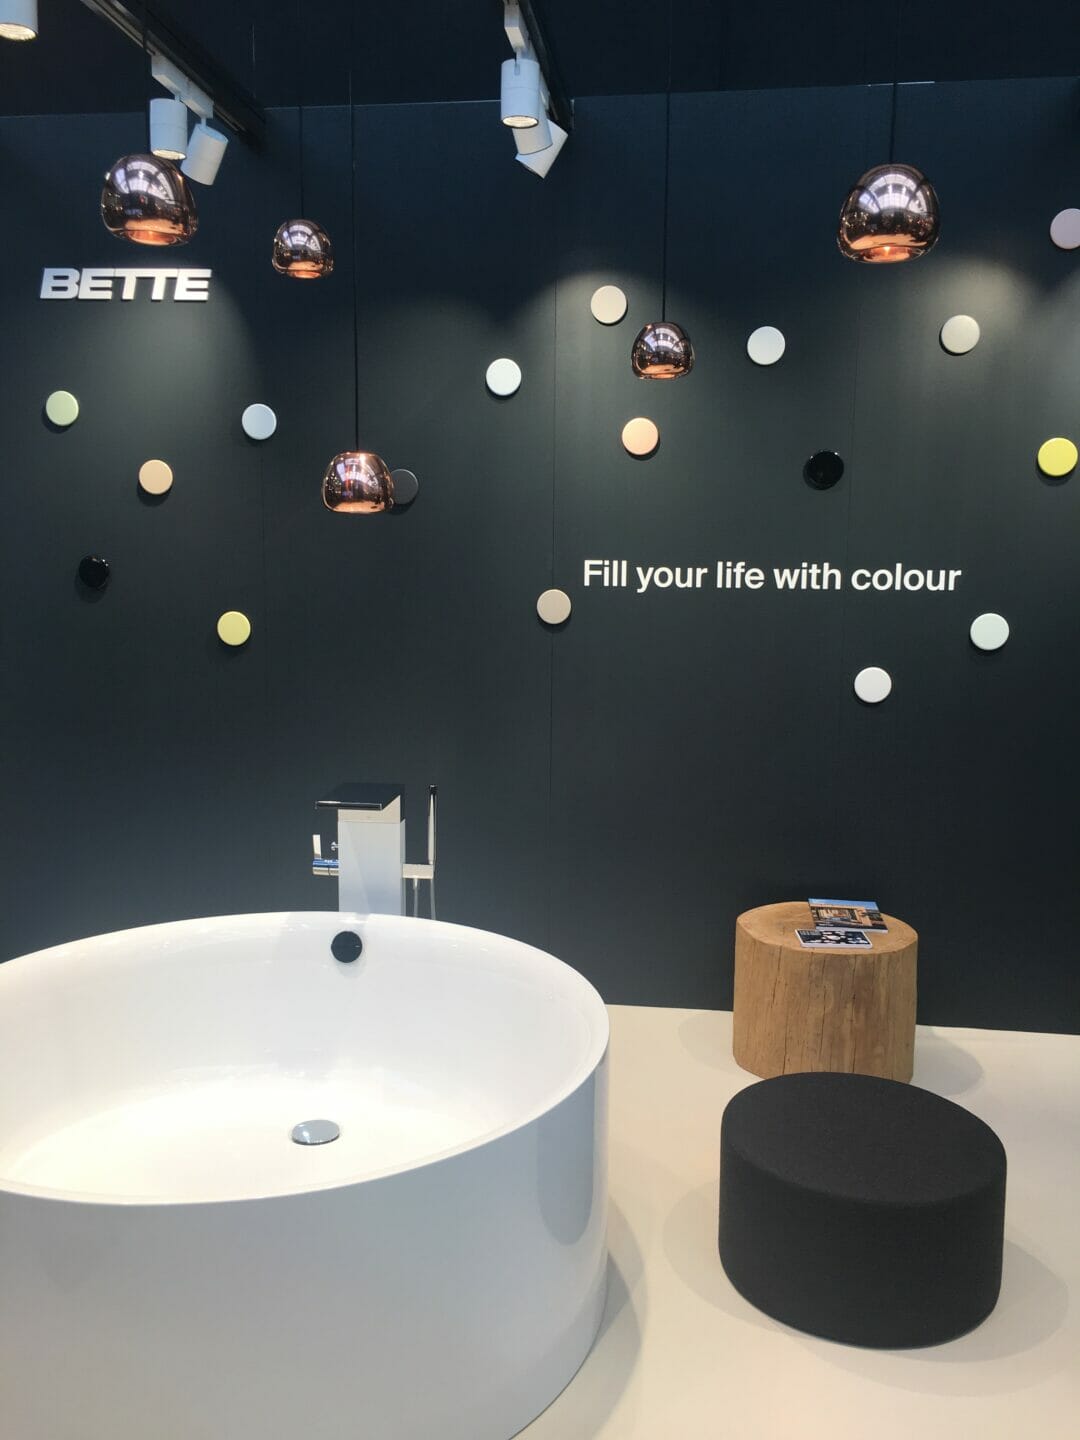 UK LAUNCH OF NEW BATH AND BASIN ‘ENDURANCE TEST’ DEMONSTRATIONS WITH FIRE AND ARTISTS CREATE ART IN A BETTE BATH